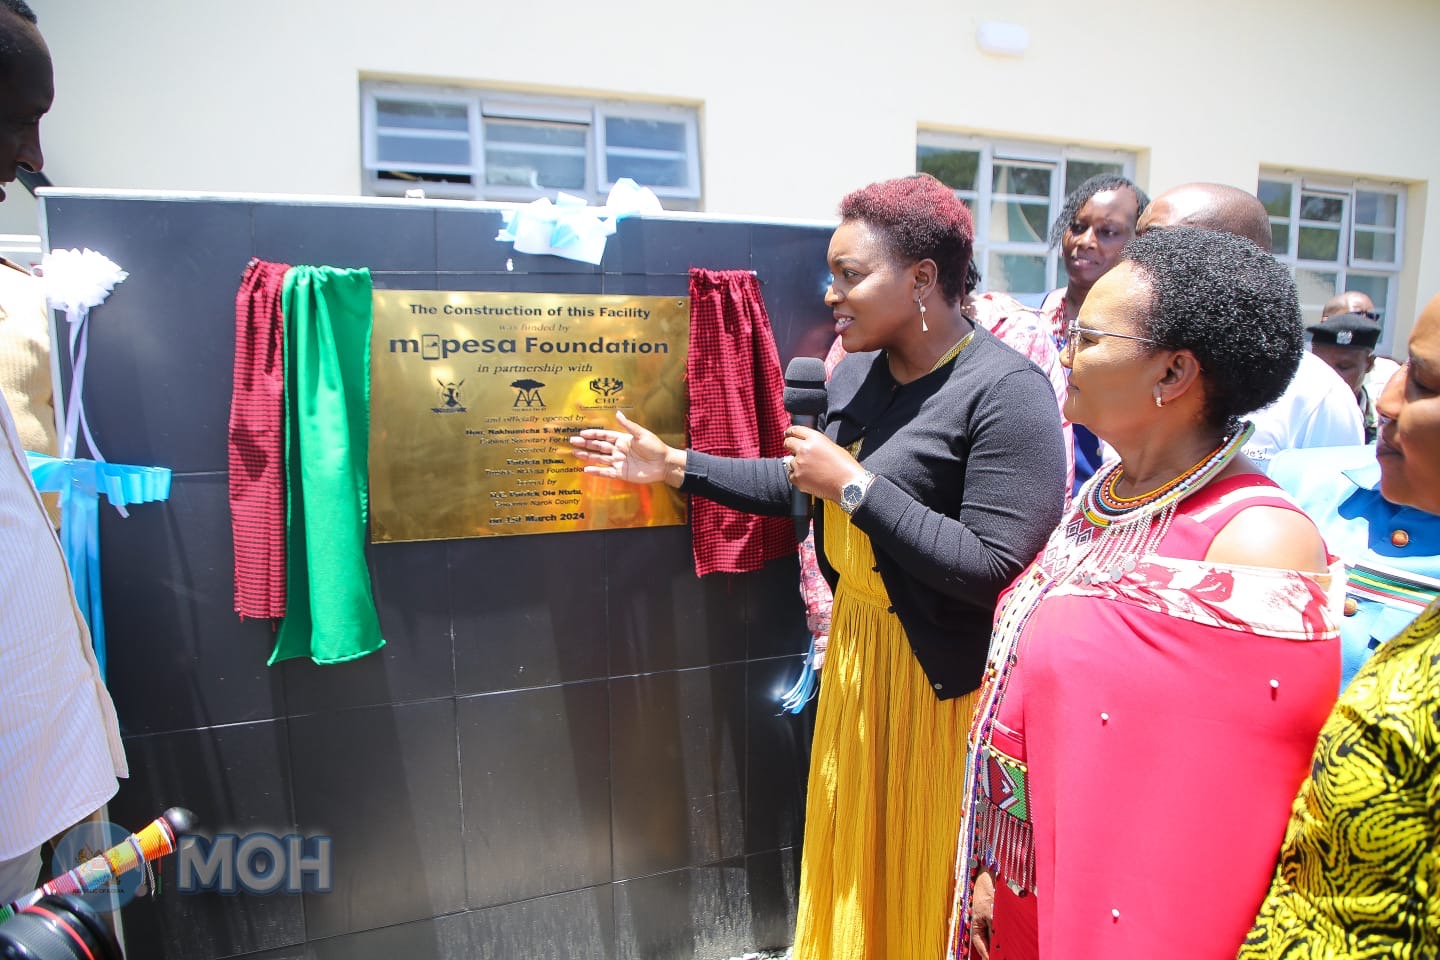 Narok, Kenya - 1st March 2024 -  In a milestone event for healthcare in Narok County, the Talek Maternal, Newborn, and Child Health (MNCH) project was officially inaugurated at Talek Hospital today.    The opening ceremony, led by Health CS Nakhumicha S. Wafula, highlighted the collaborative efforts of the M-PESA Foundation, Gertrude’s Hospital Foundation, Community Health Partners, and the Narok County government in establishing this vital facility.    Addressing attendees, Health CS Nakhumicha S. Wafula e